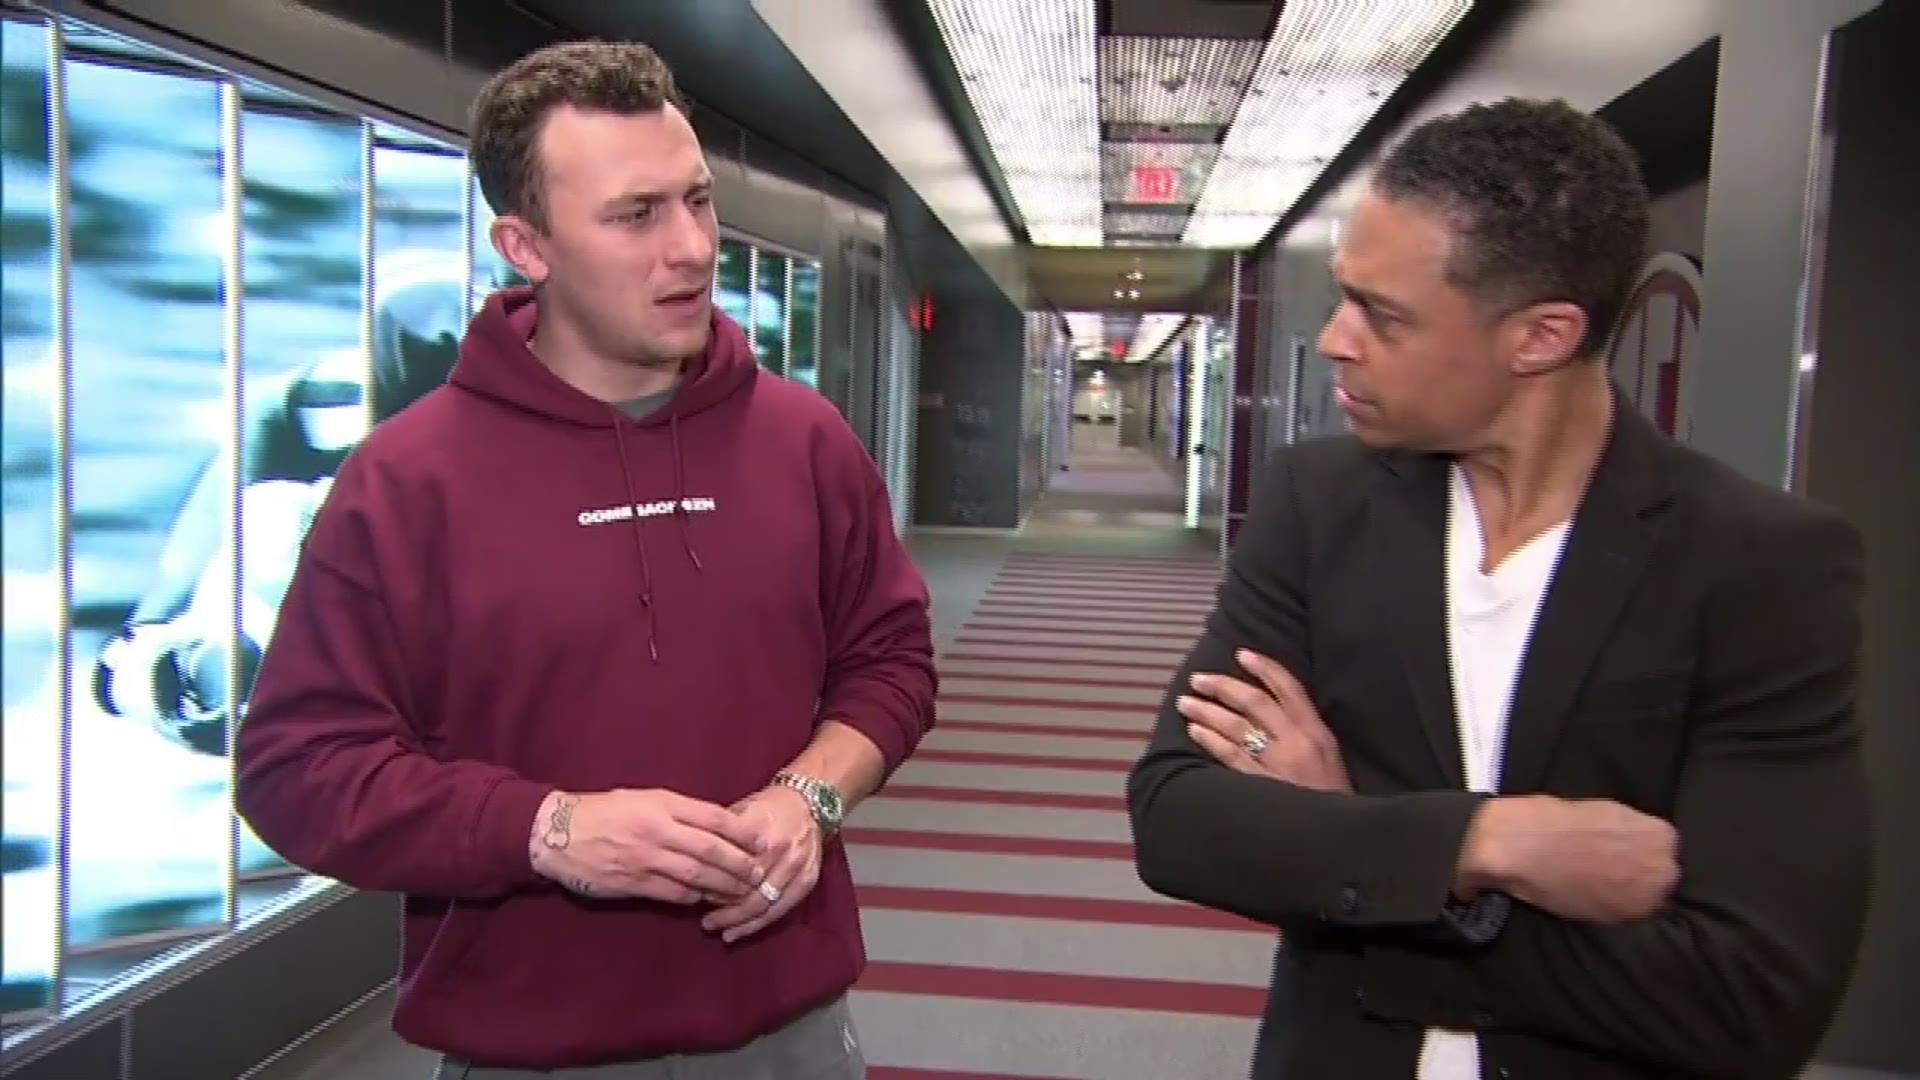 Johnny Manziel told GMA he's bipolar and has stopped drinking. Video: ABC